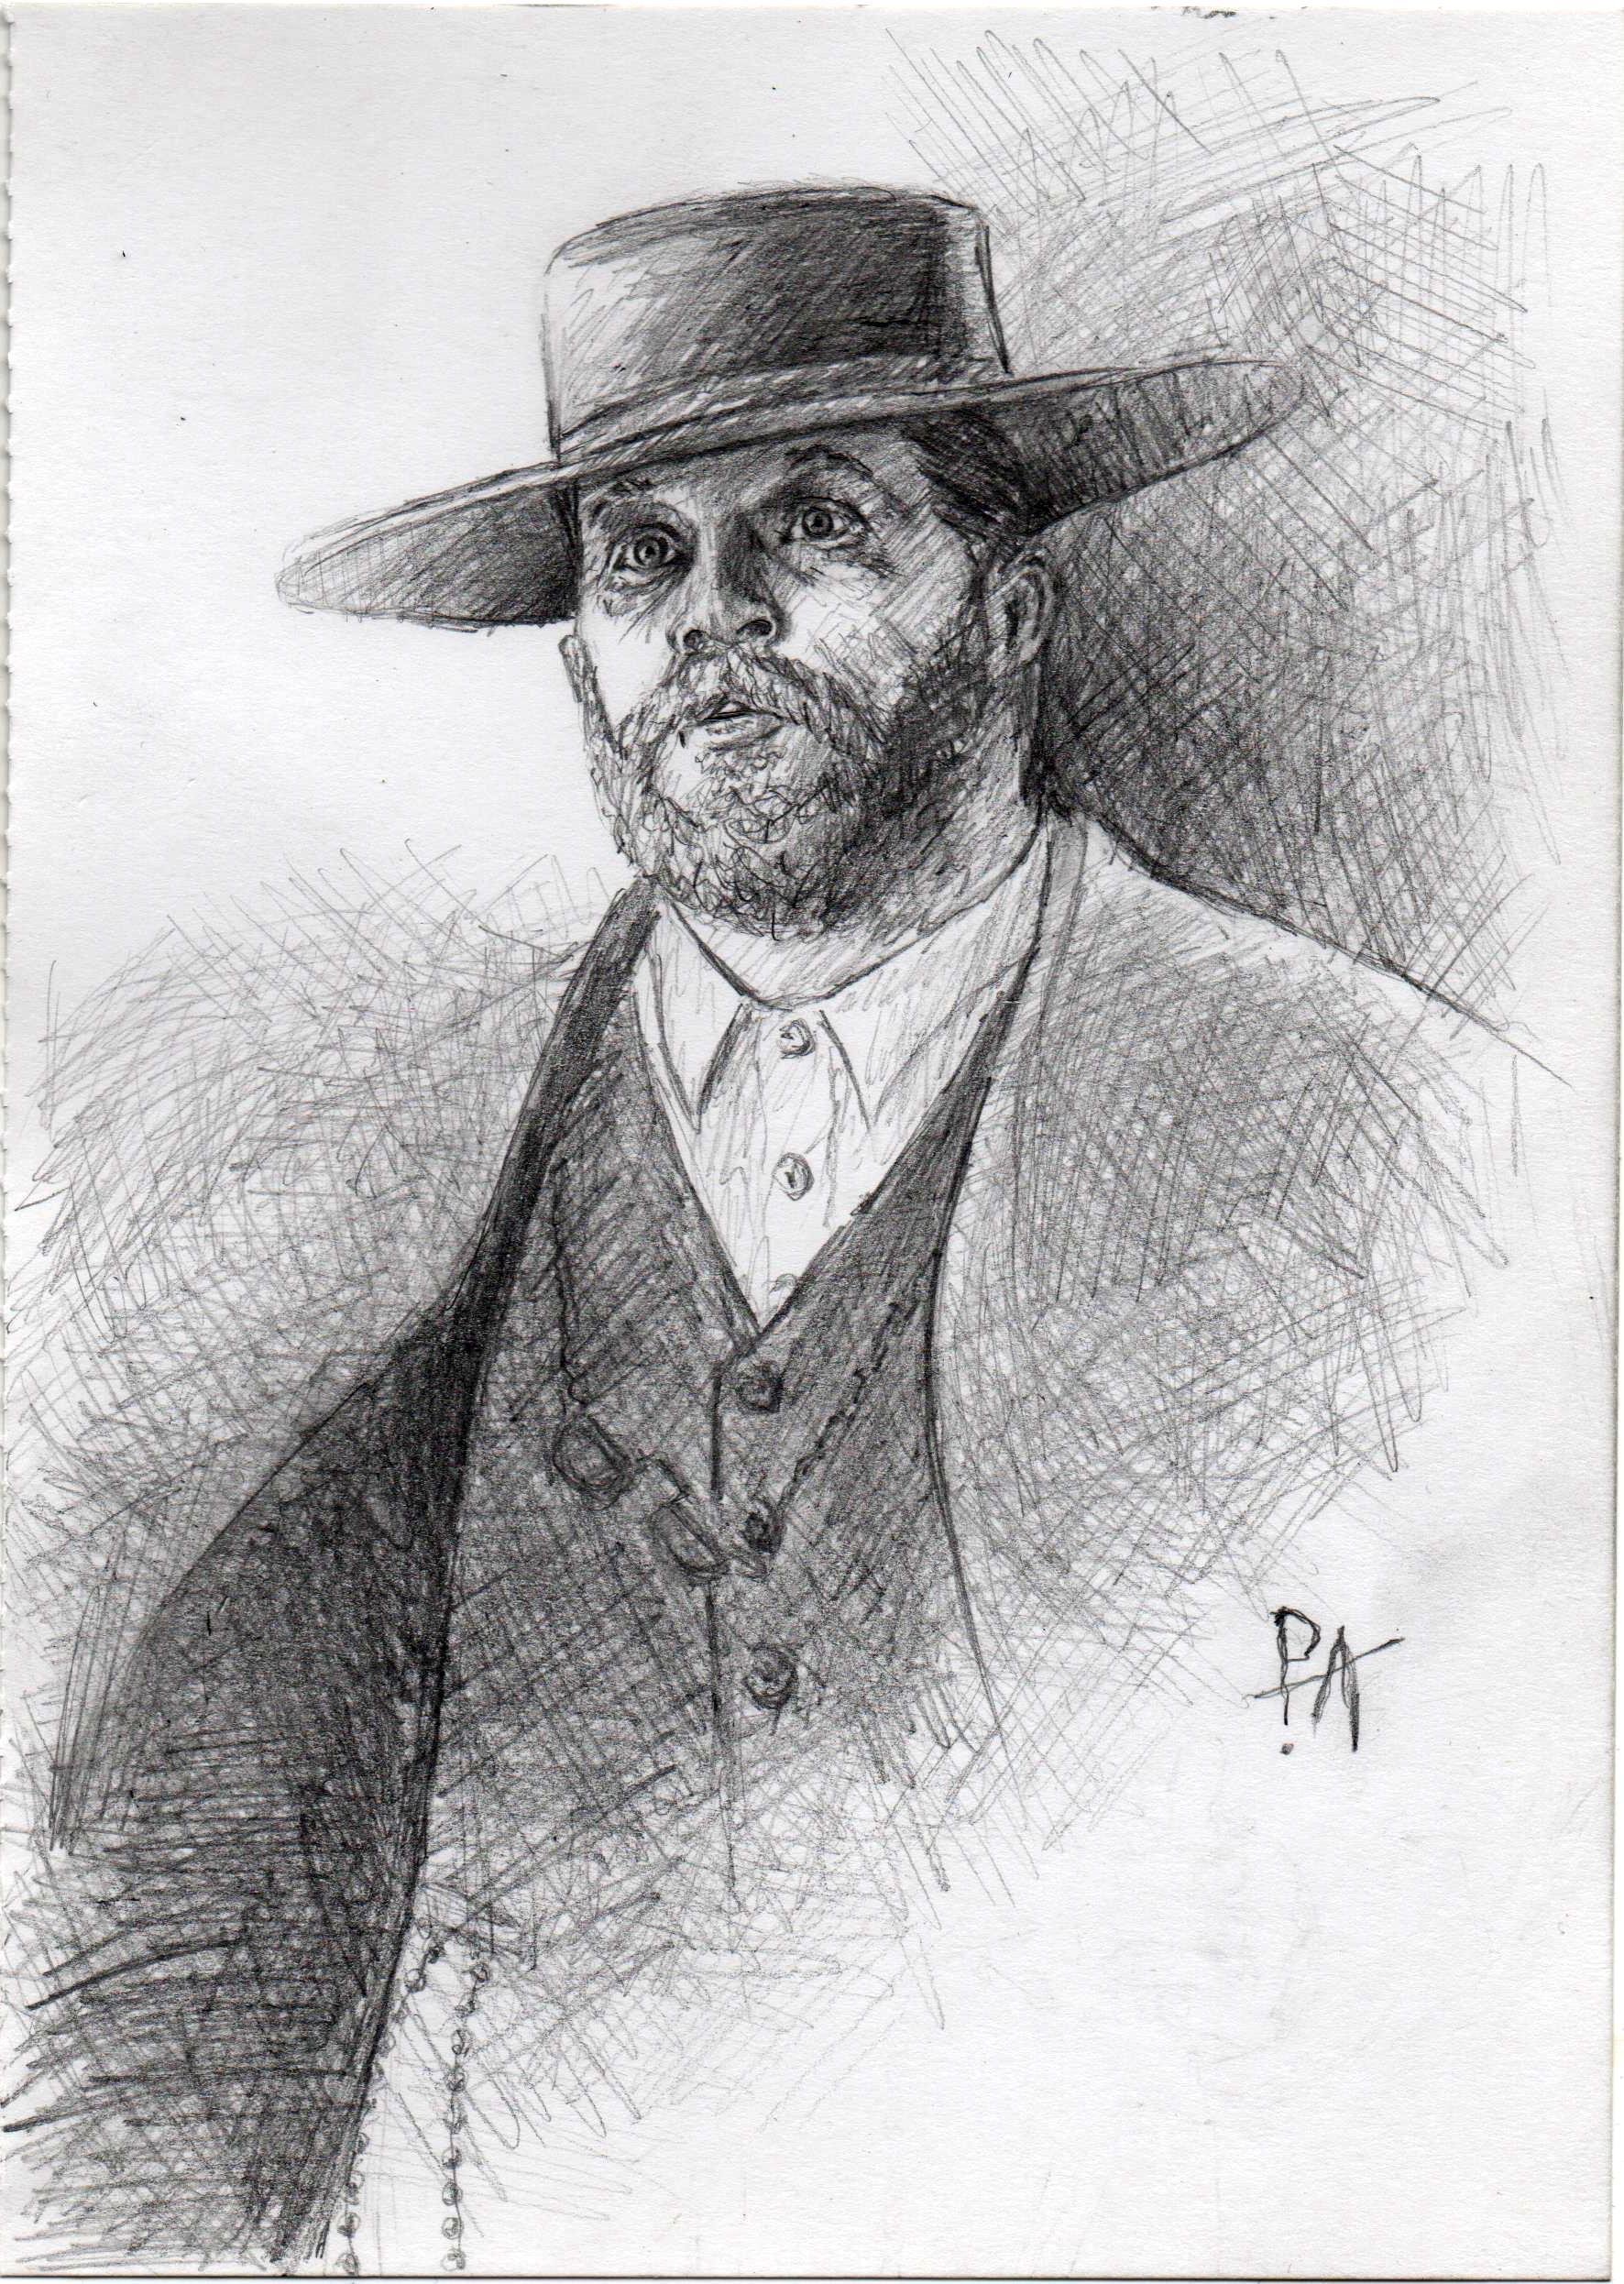 My Alfie Solomons sketch. What do you think ?